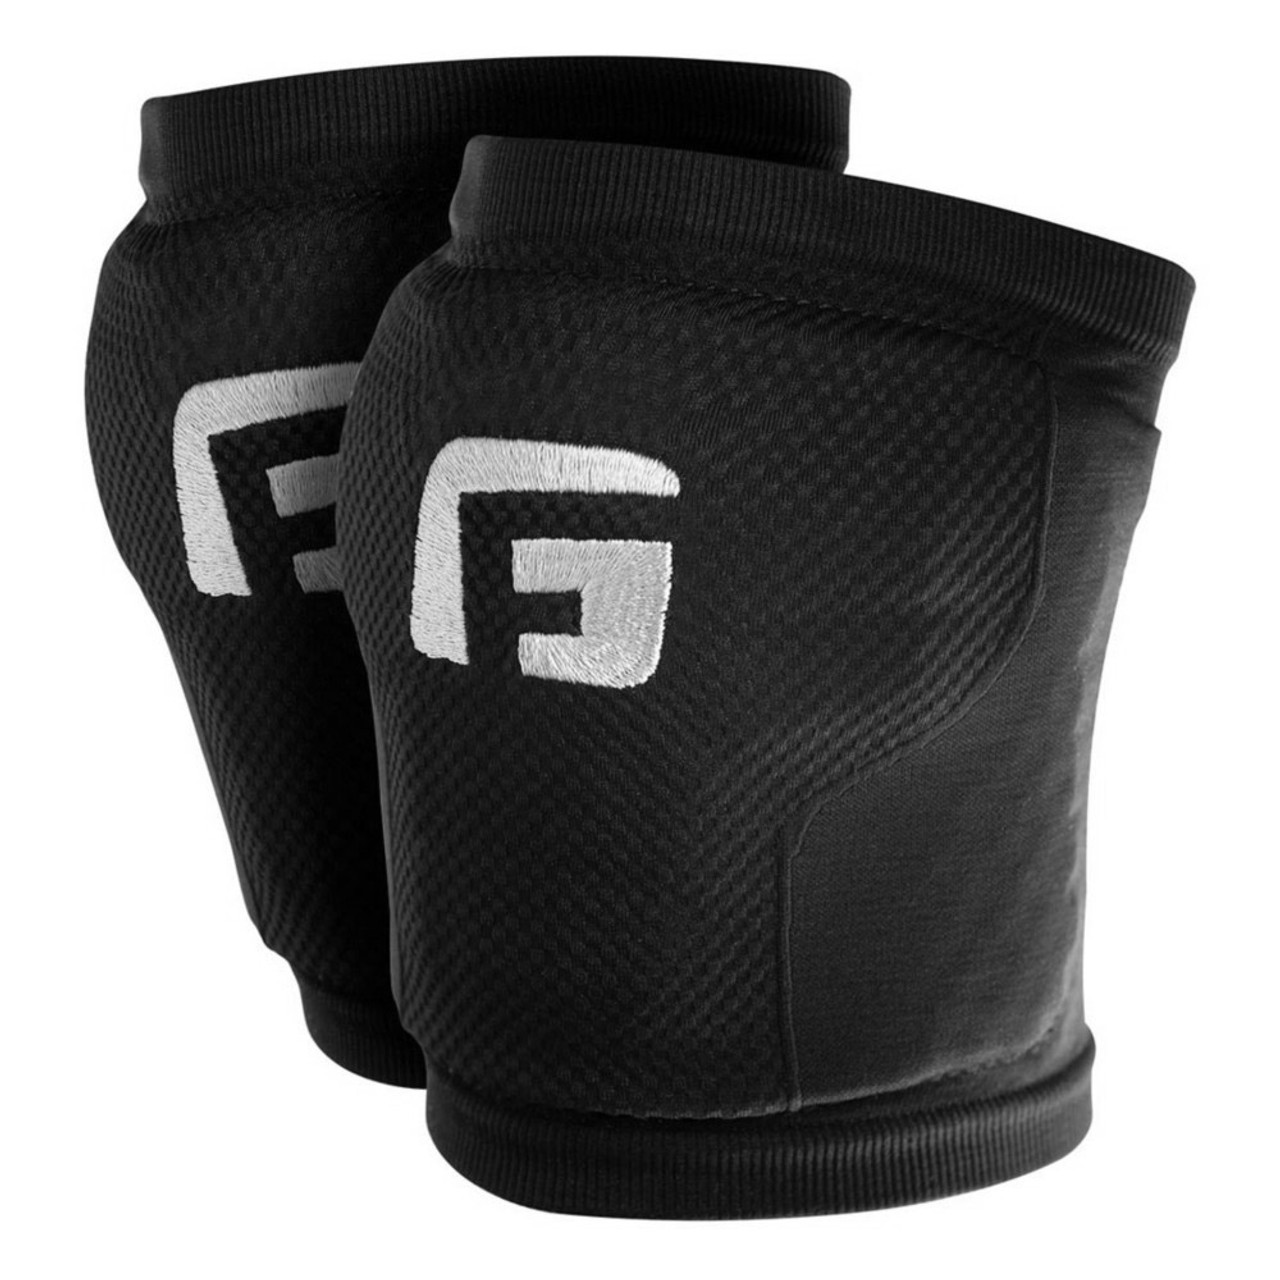 G-Form Envy Volleyball Kneepads